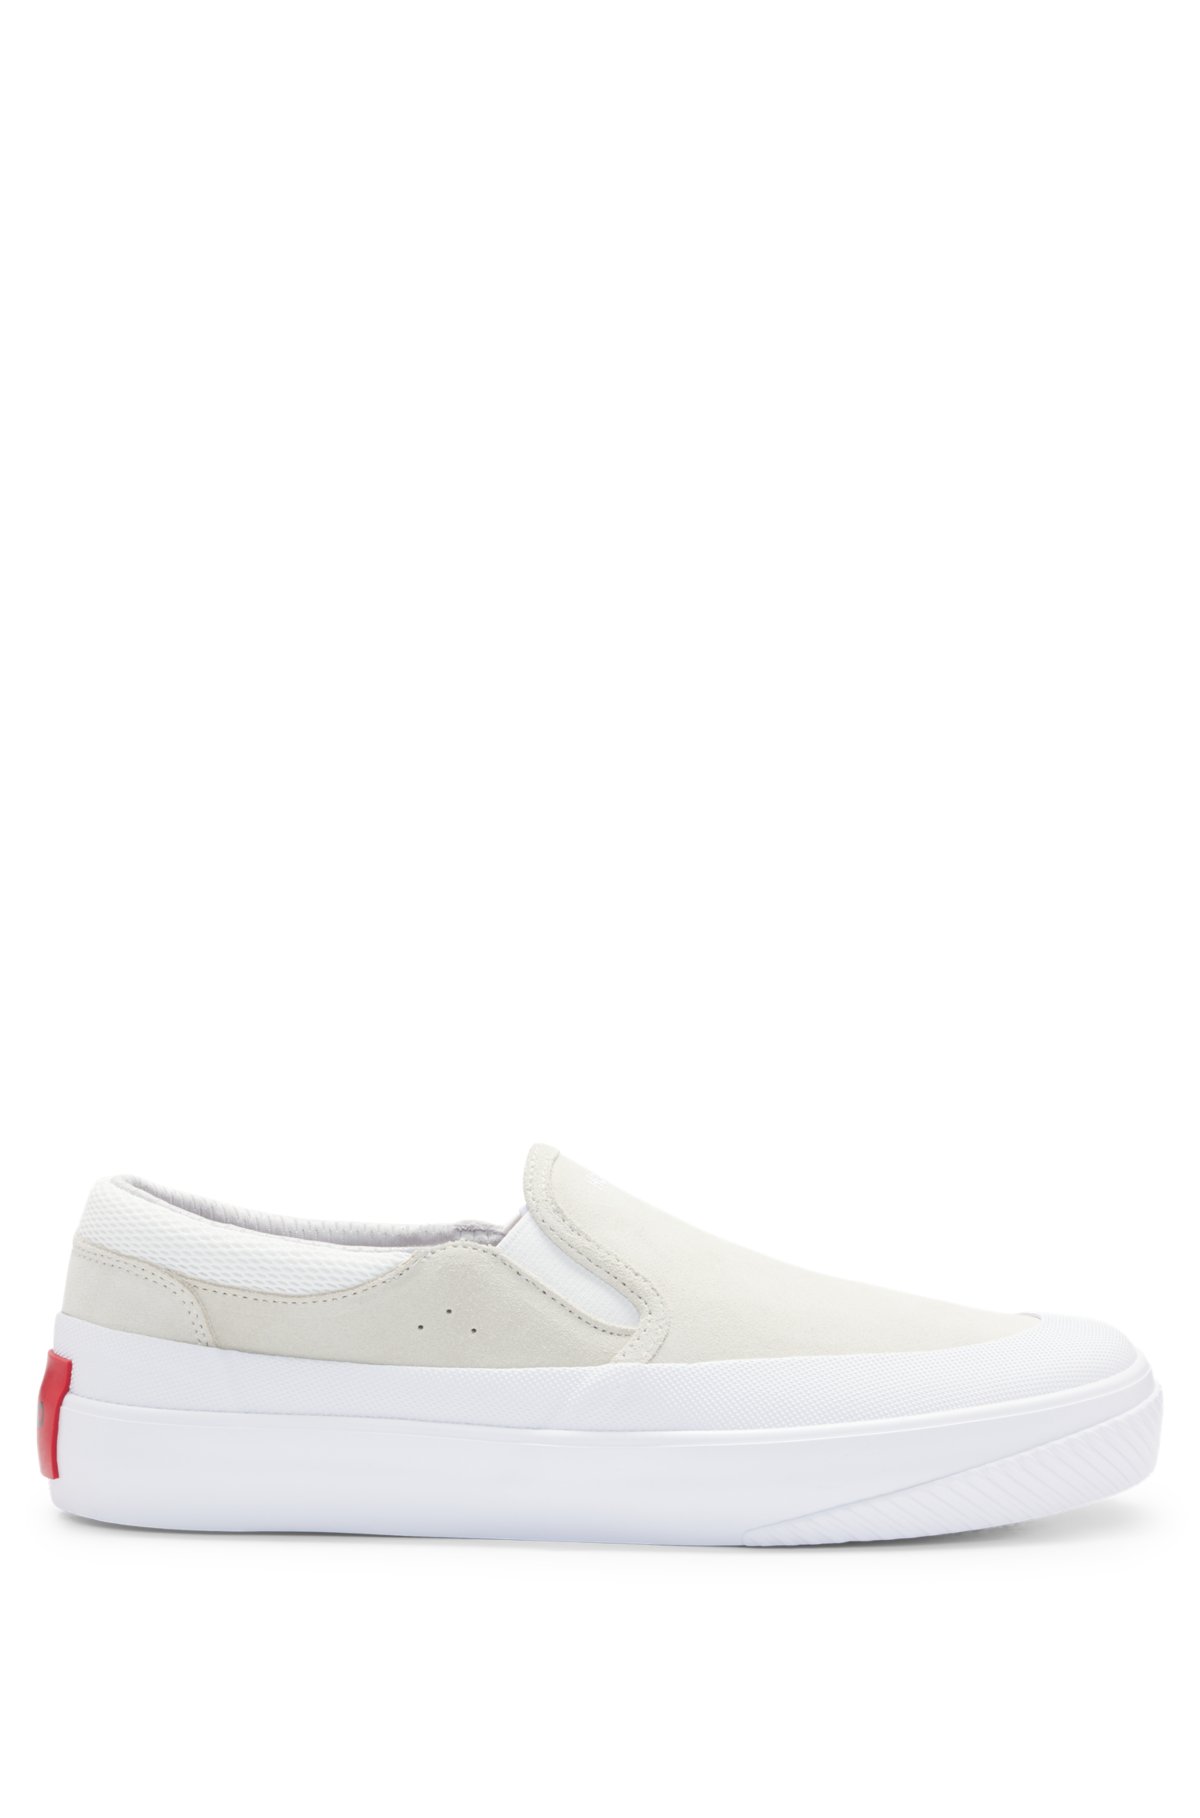 Suede slip-on shoes with signature slogan, White